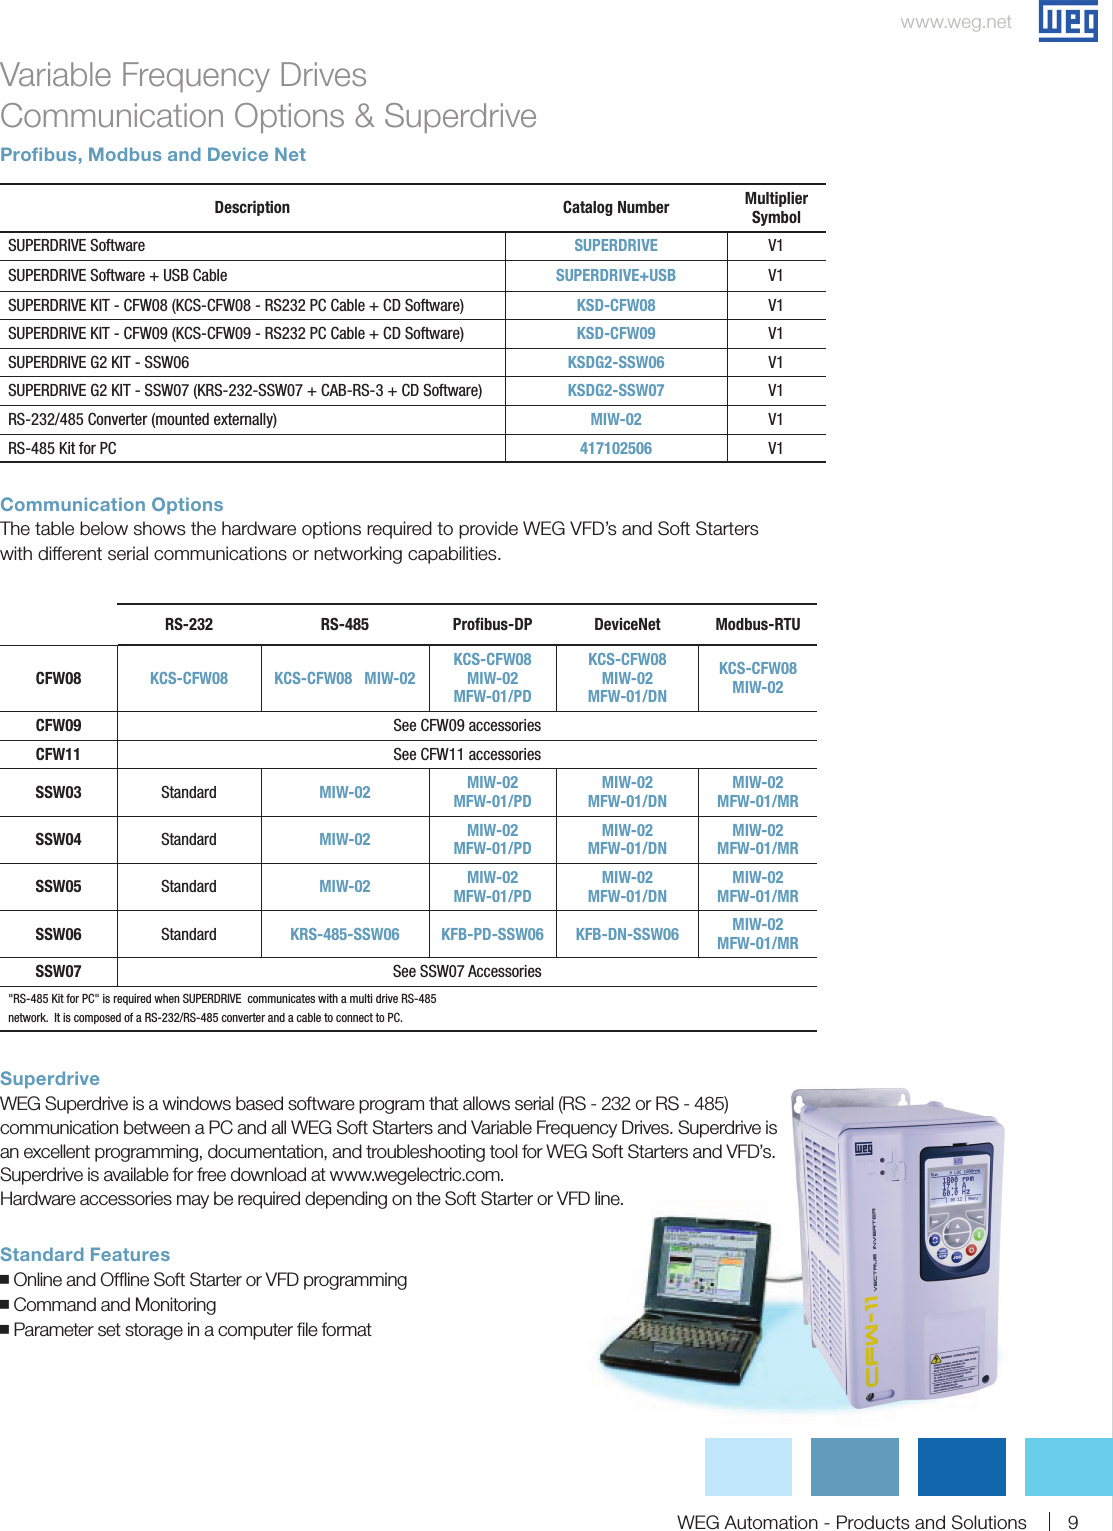 Page 9 of 12 - 103146 1 Weg Variable Frequency Drive Brochure User Manual